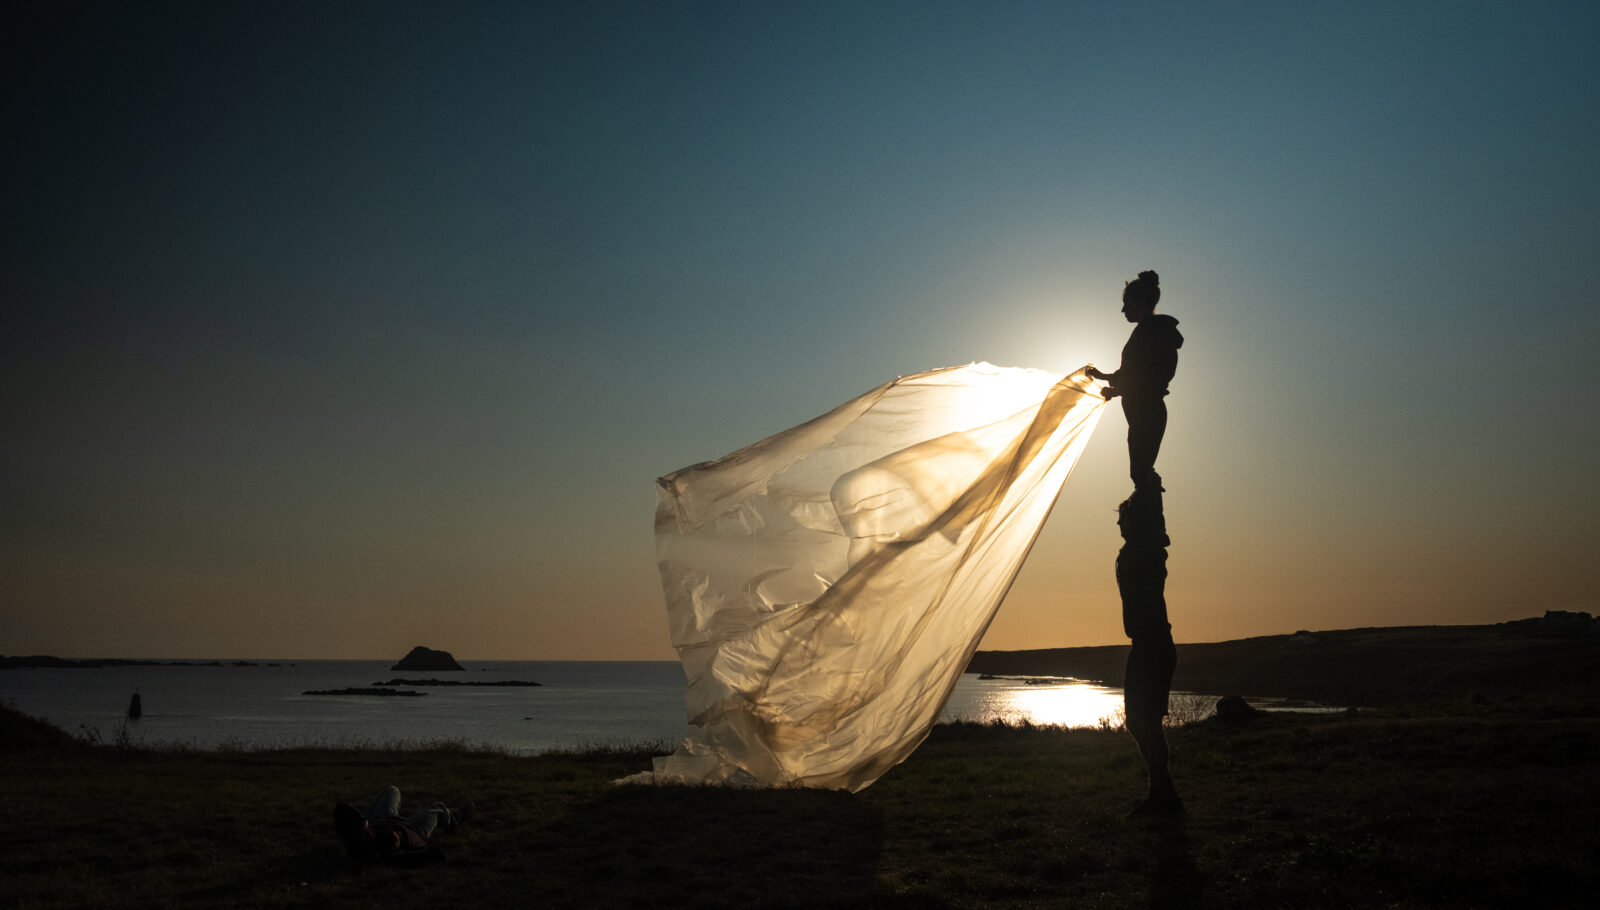 Circus Barcode artist Alexandra Royer in performance on a beach, part of her work with "Elementerre". She stands in profile silhouette with one side to the sunset, unfurling a billowing plastic sheet with both hands